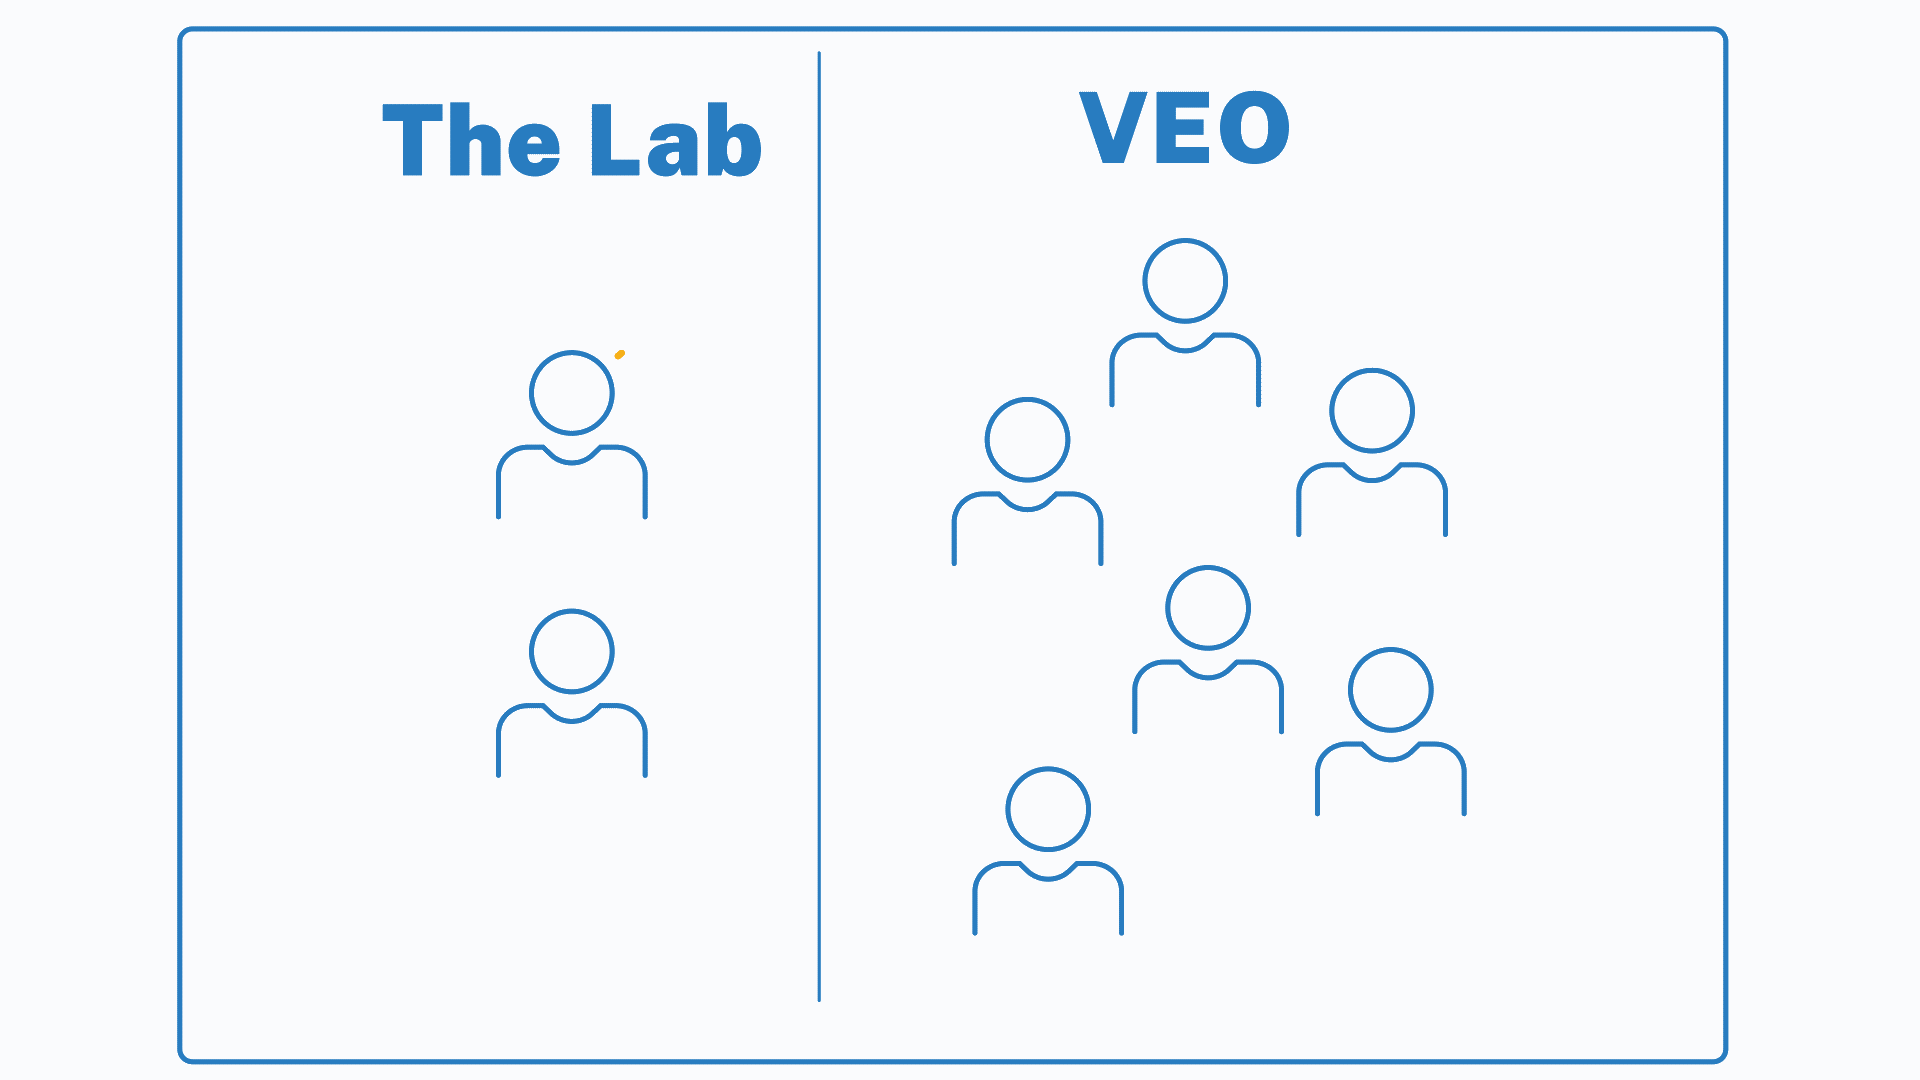 An illustration of human-like figures on the left side of the screen labeled The Lab and other human-like figures on the right side of the screen labeled VEO. Between the lab figures and VEO figures, dashed lines appear, indicating the transfer of knowledge from The Lab group to the VEO group.